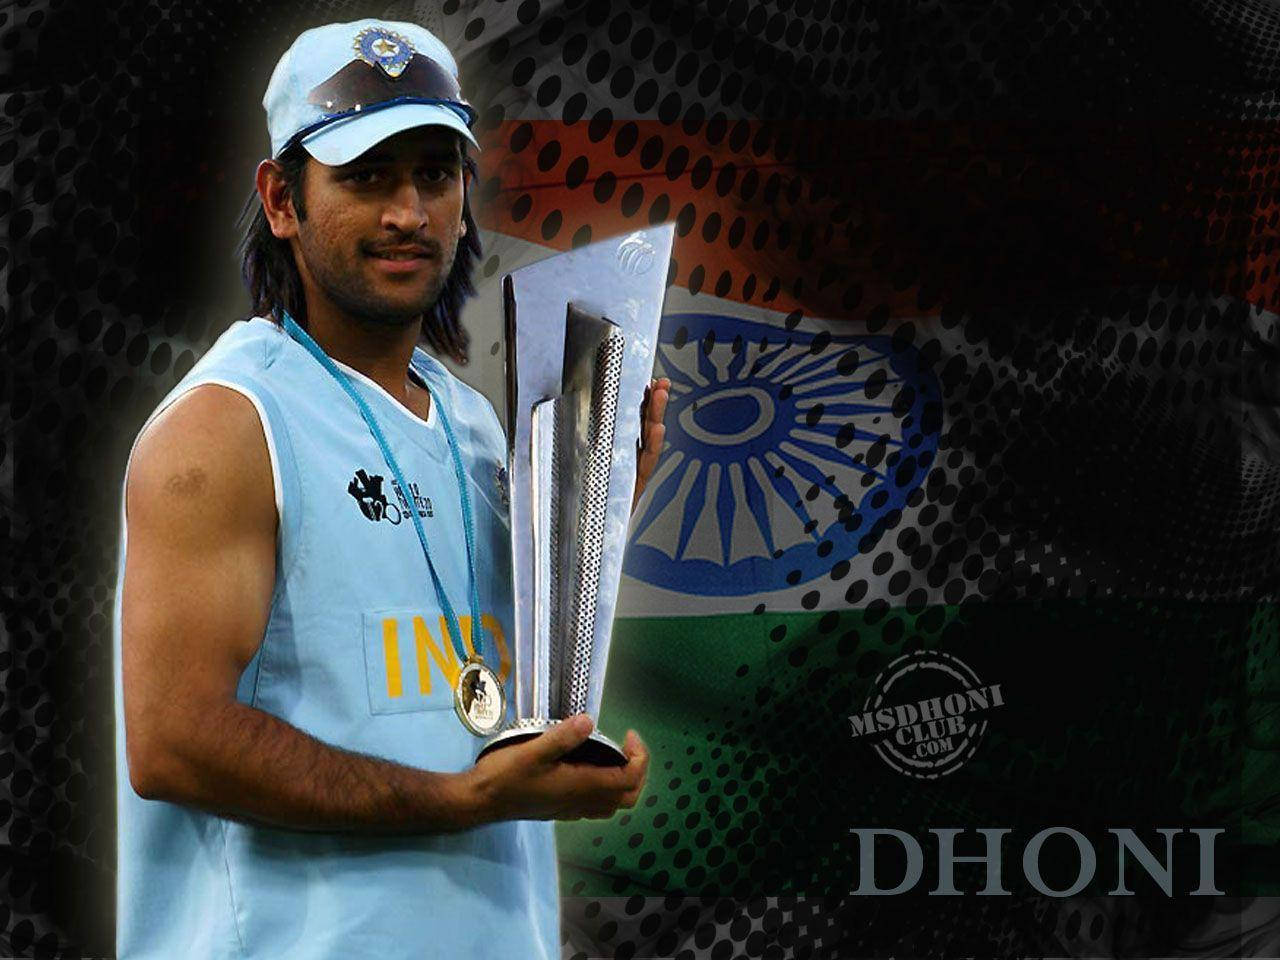 Ms Dhoni T20 World Cup